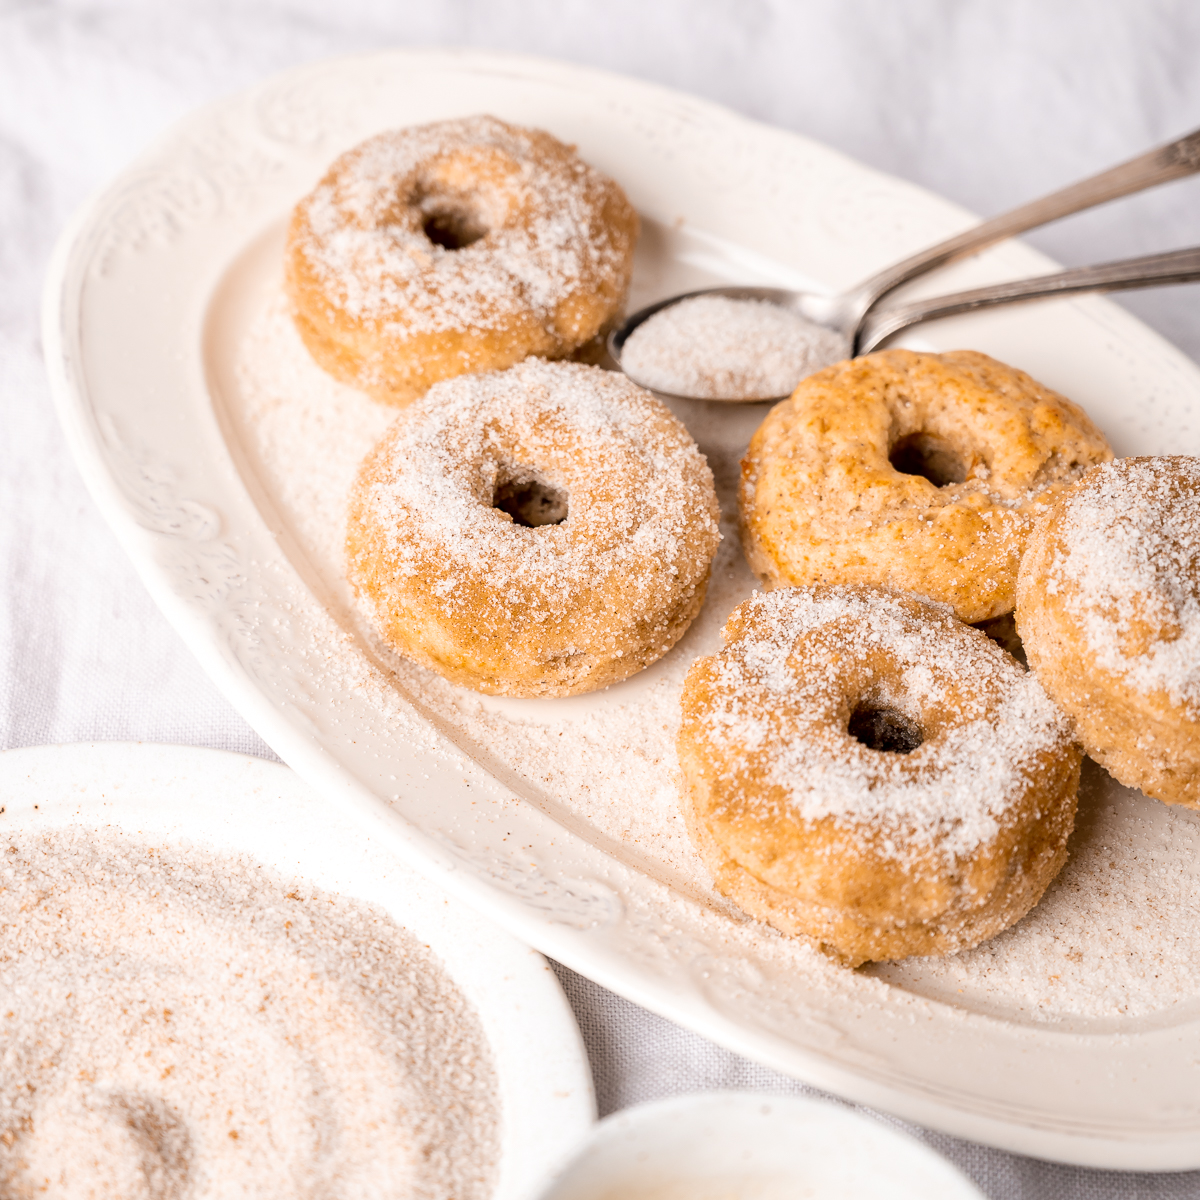 Baked cinnamon sugar donuts on a white decorative plate, with a spoonful and a bowl of cinnamon sugar nearby on a light textile surface.